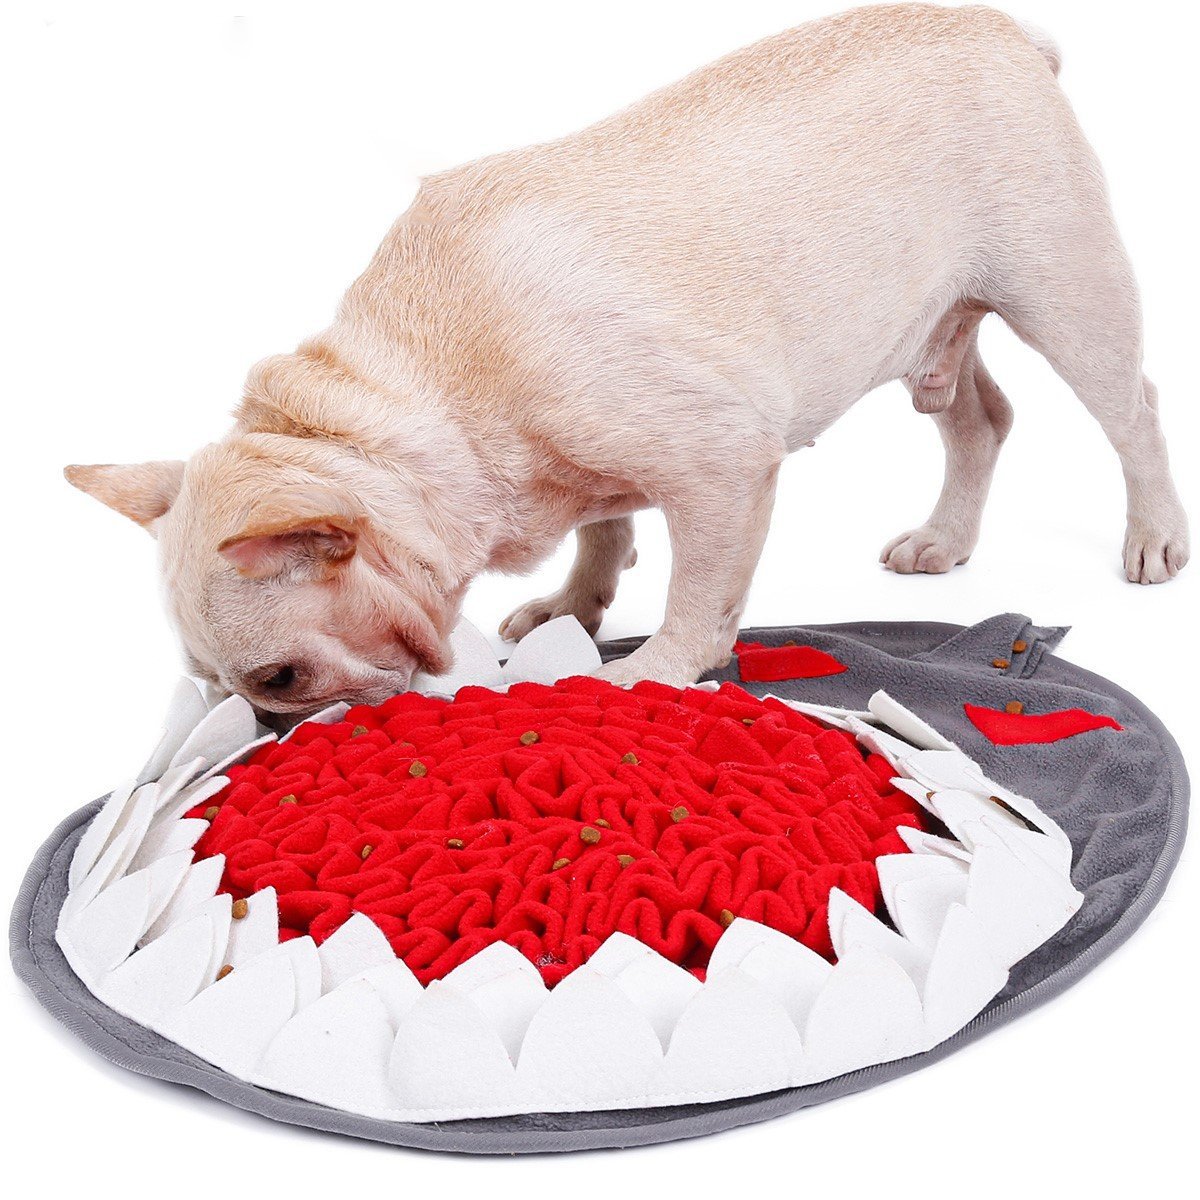 Brunch-Themed Snuffle Mat Toy for Sale | DoggieLawn